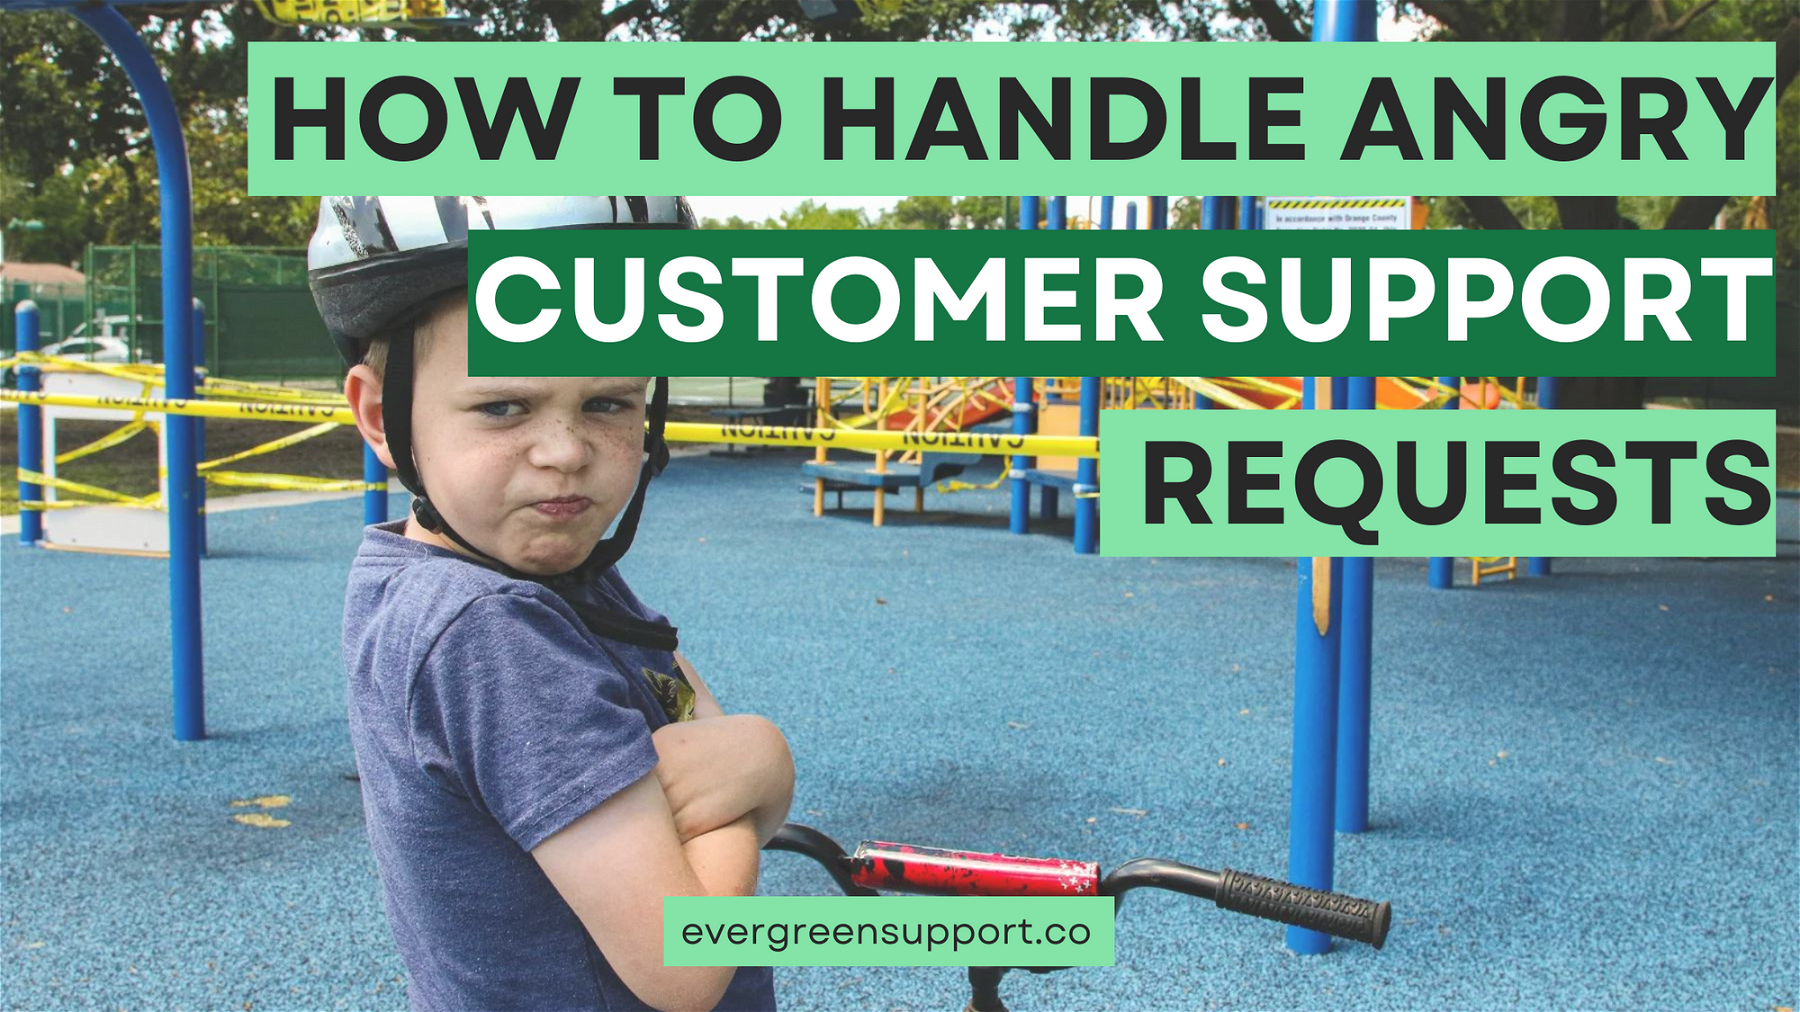 How to Handle Angry Customer Support Requests